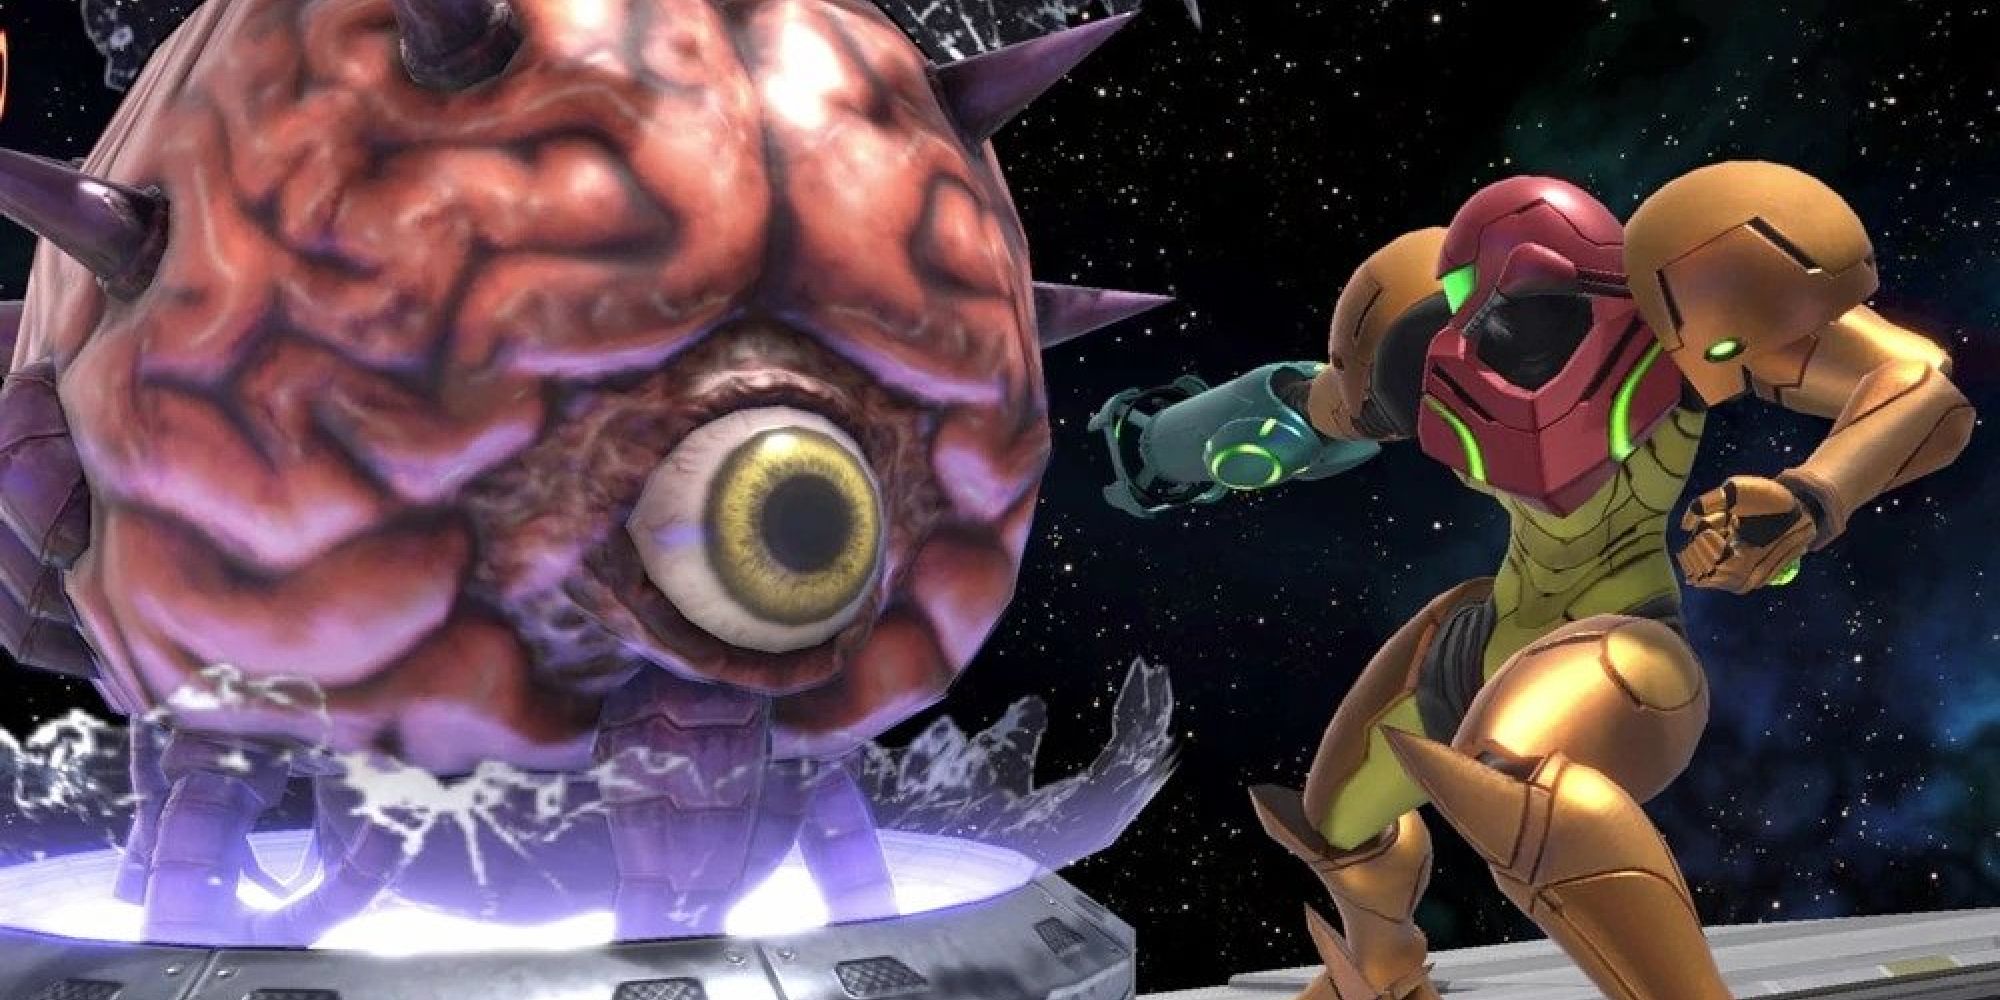 Samus aiming her cannon at a Mother Brain Assist Trophy in Super Smash Bros Ultimate